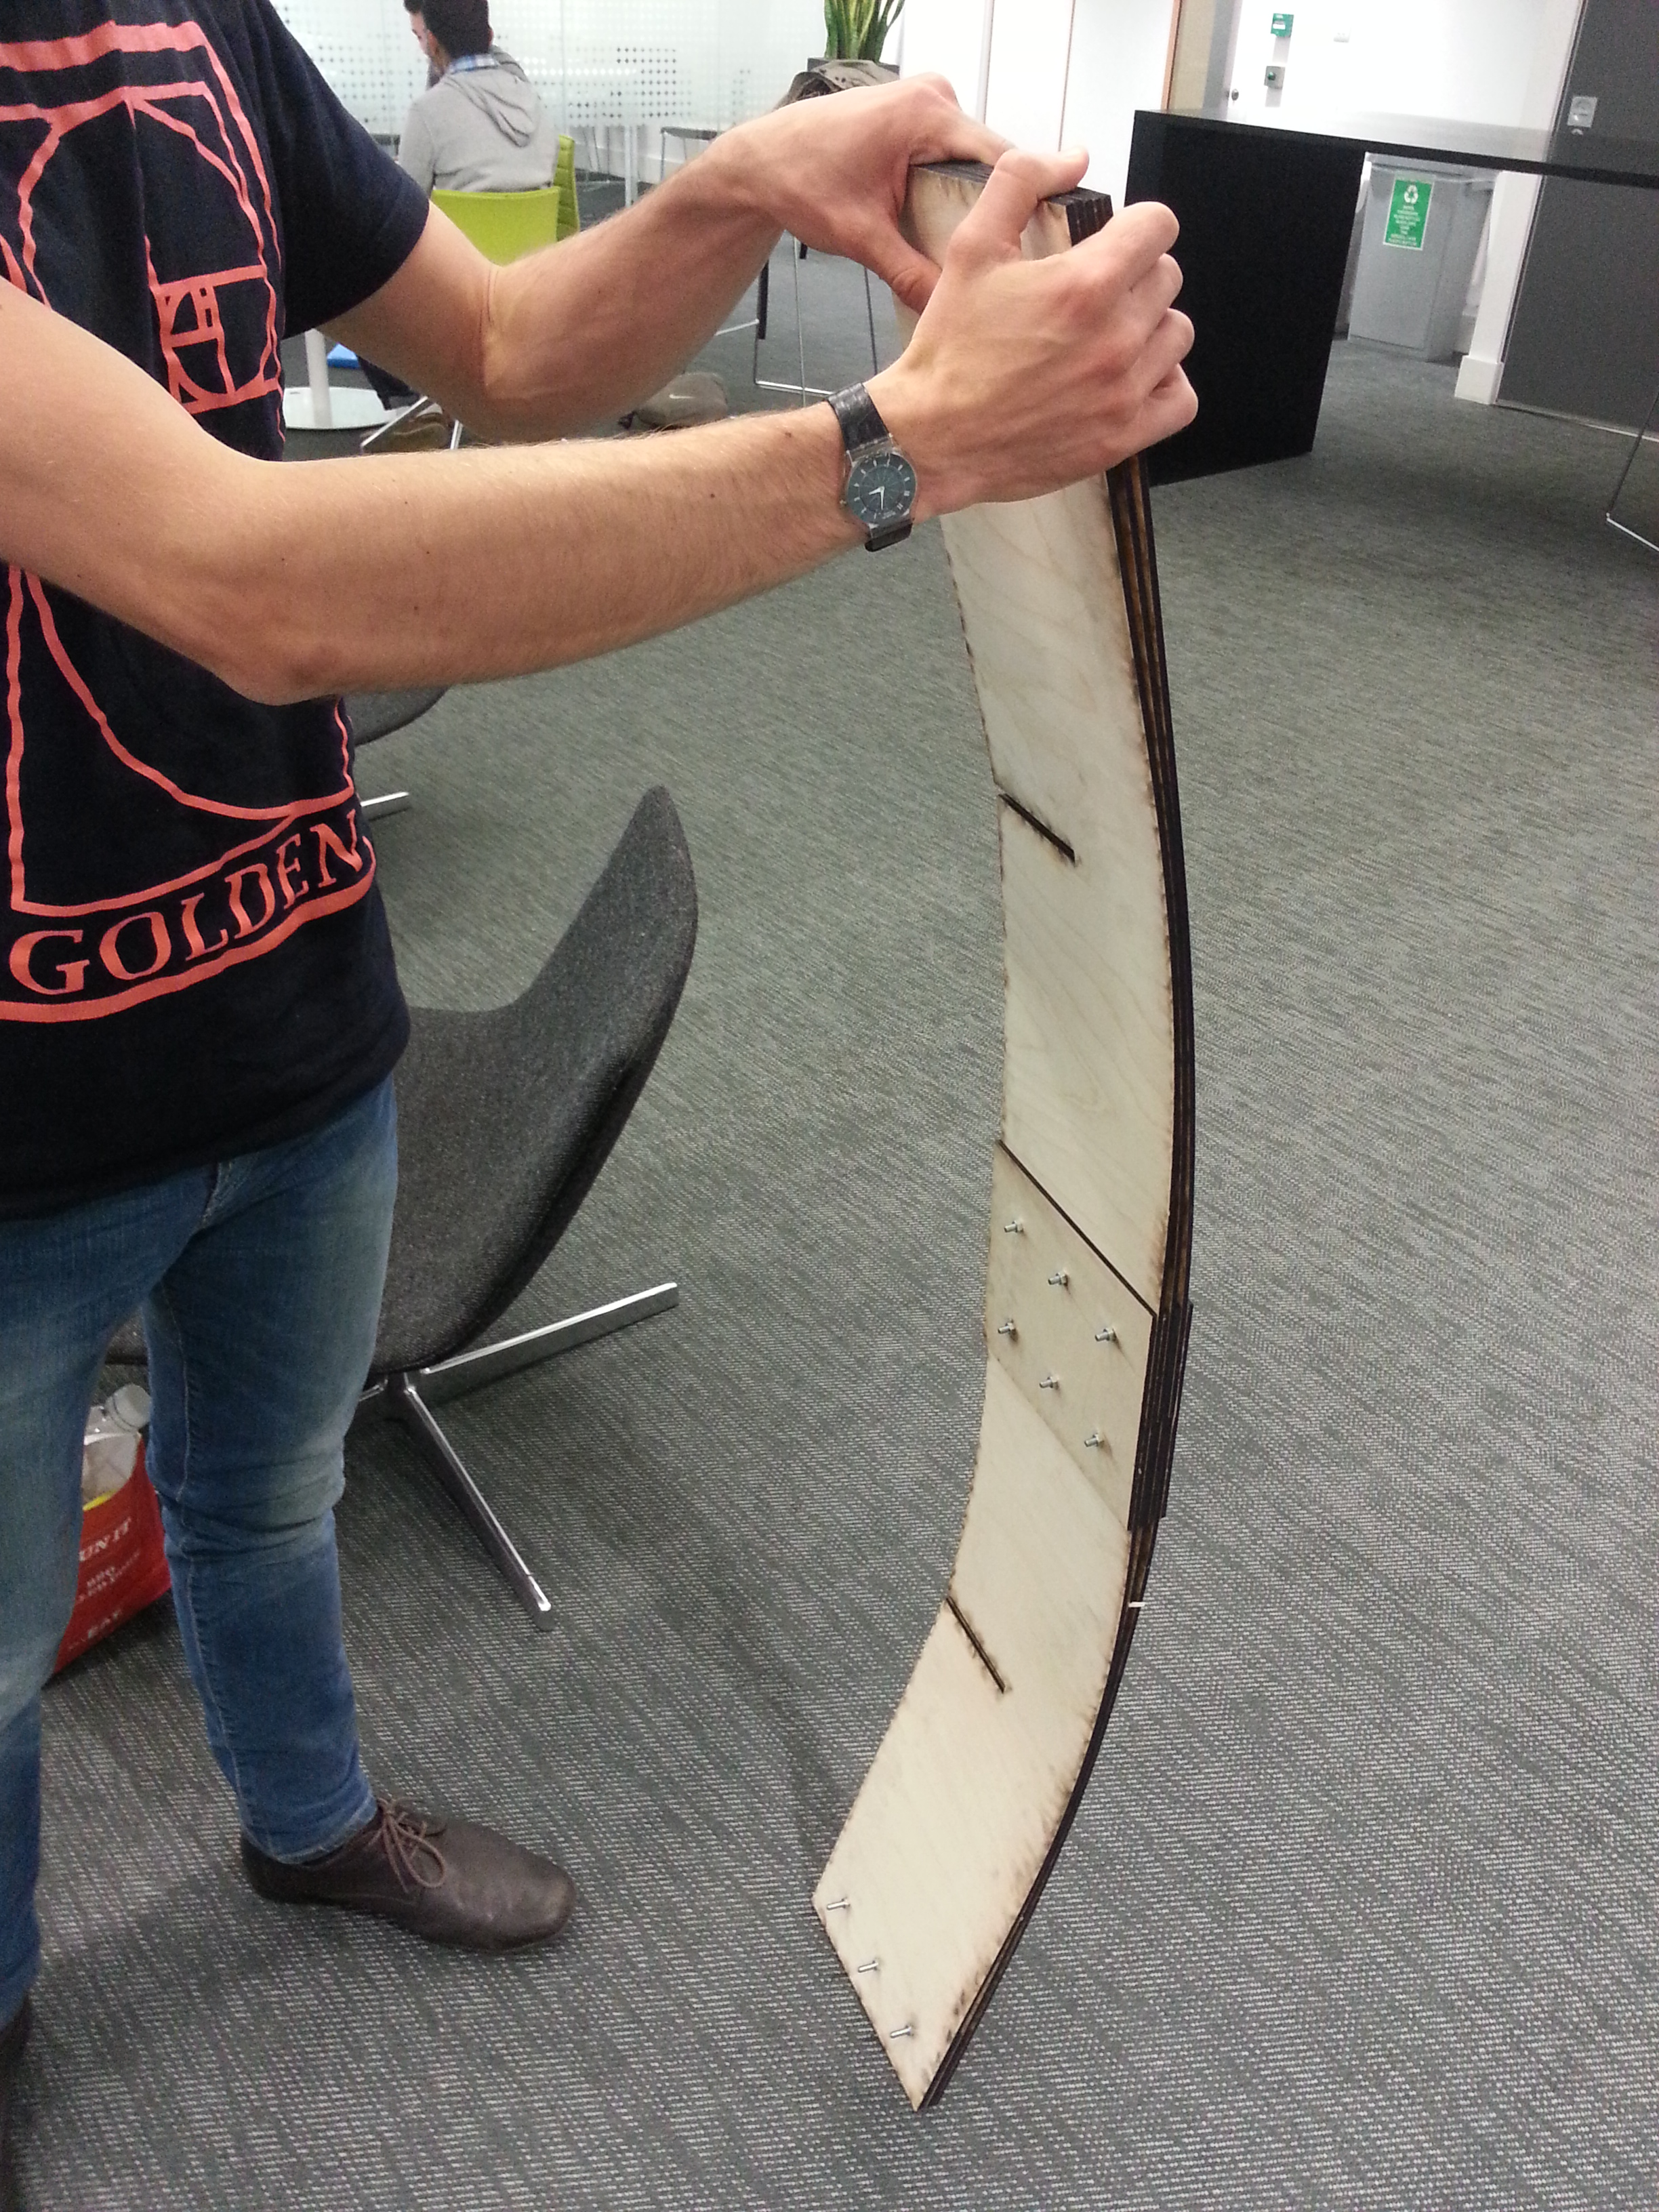 Chris Ingram testing the bendiness of the laminate structure